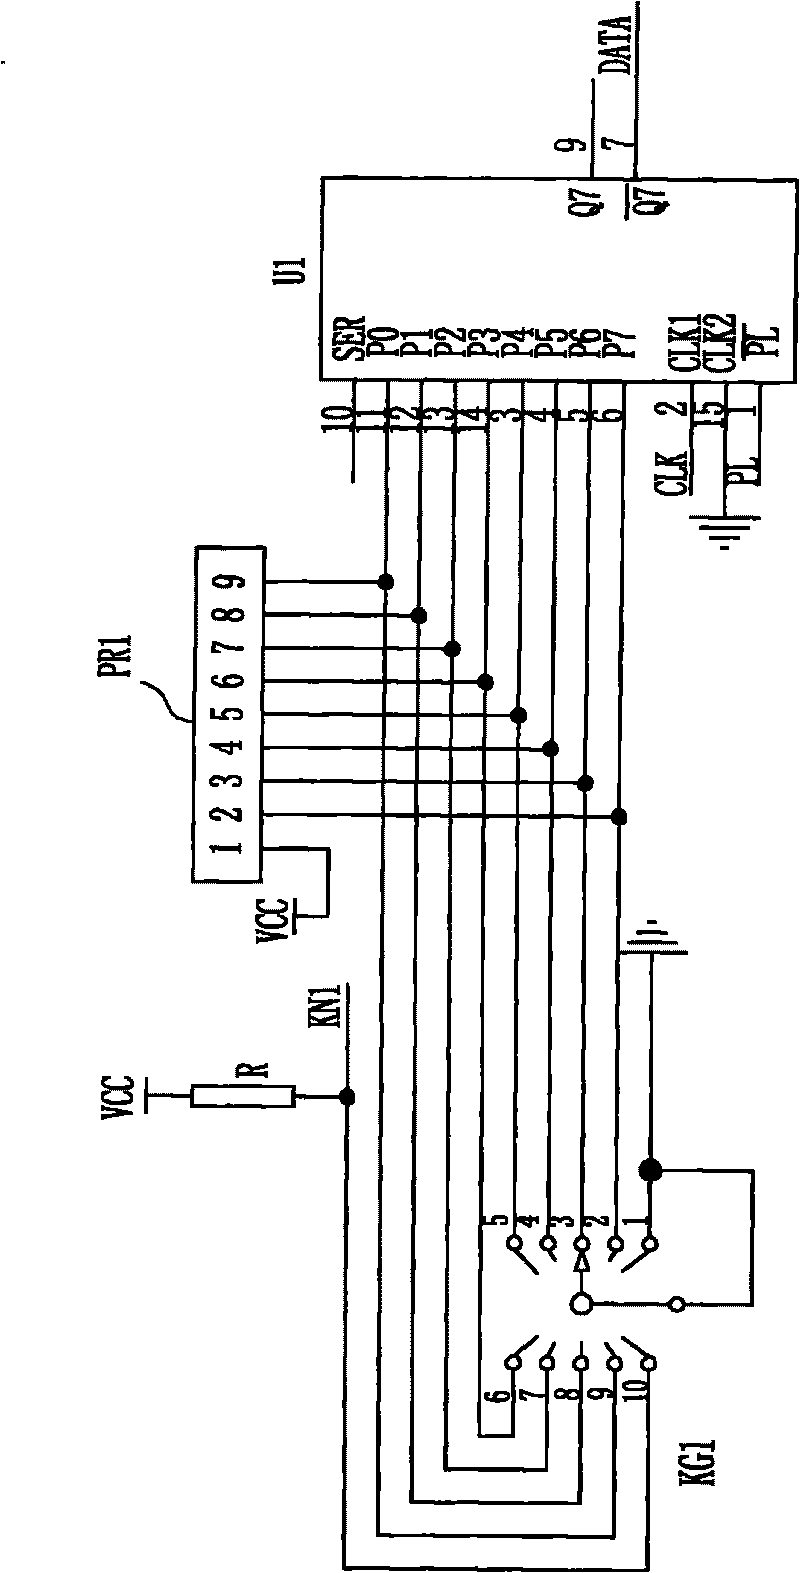 Control circuit of oven